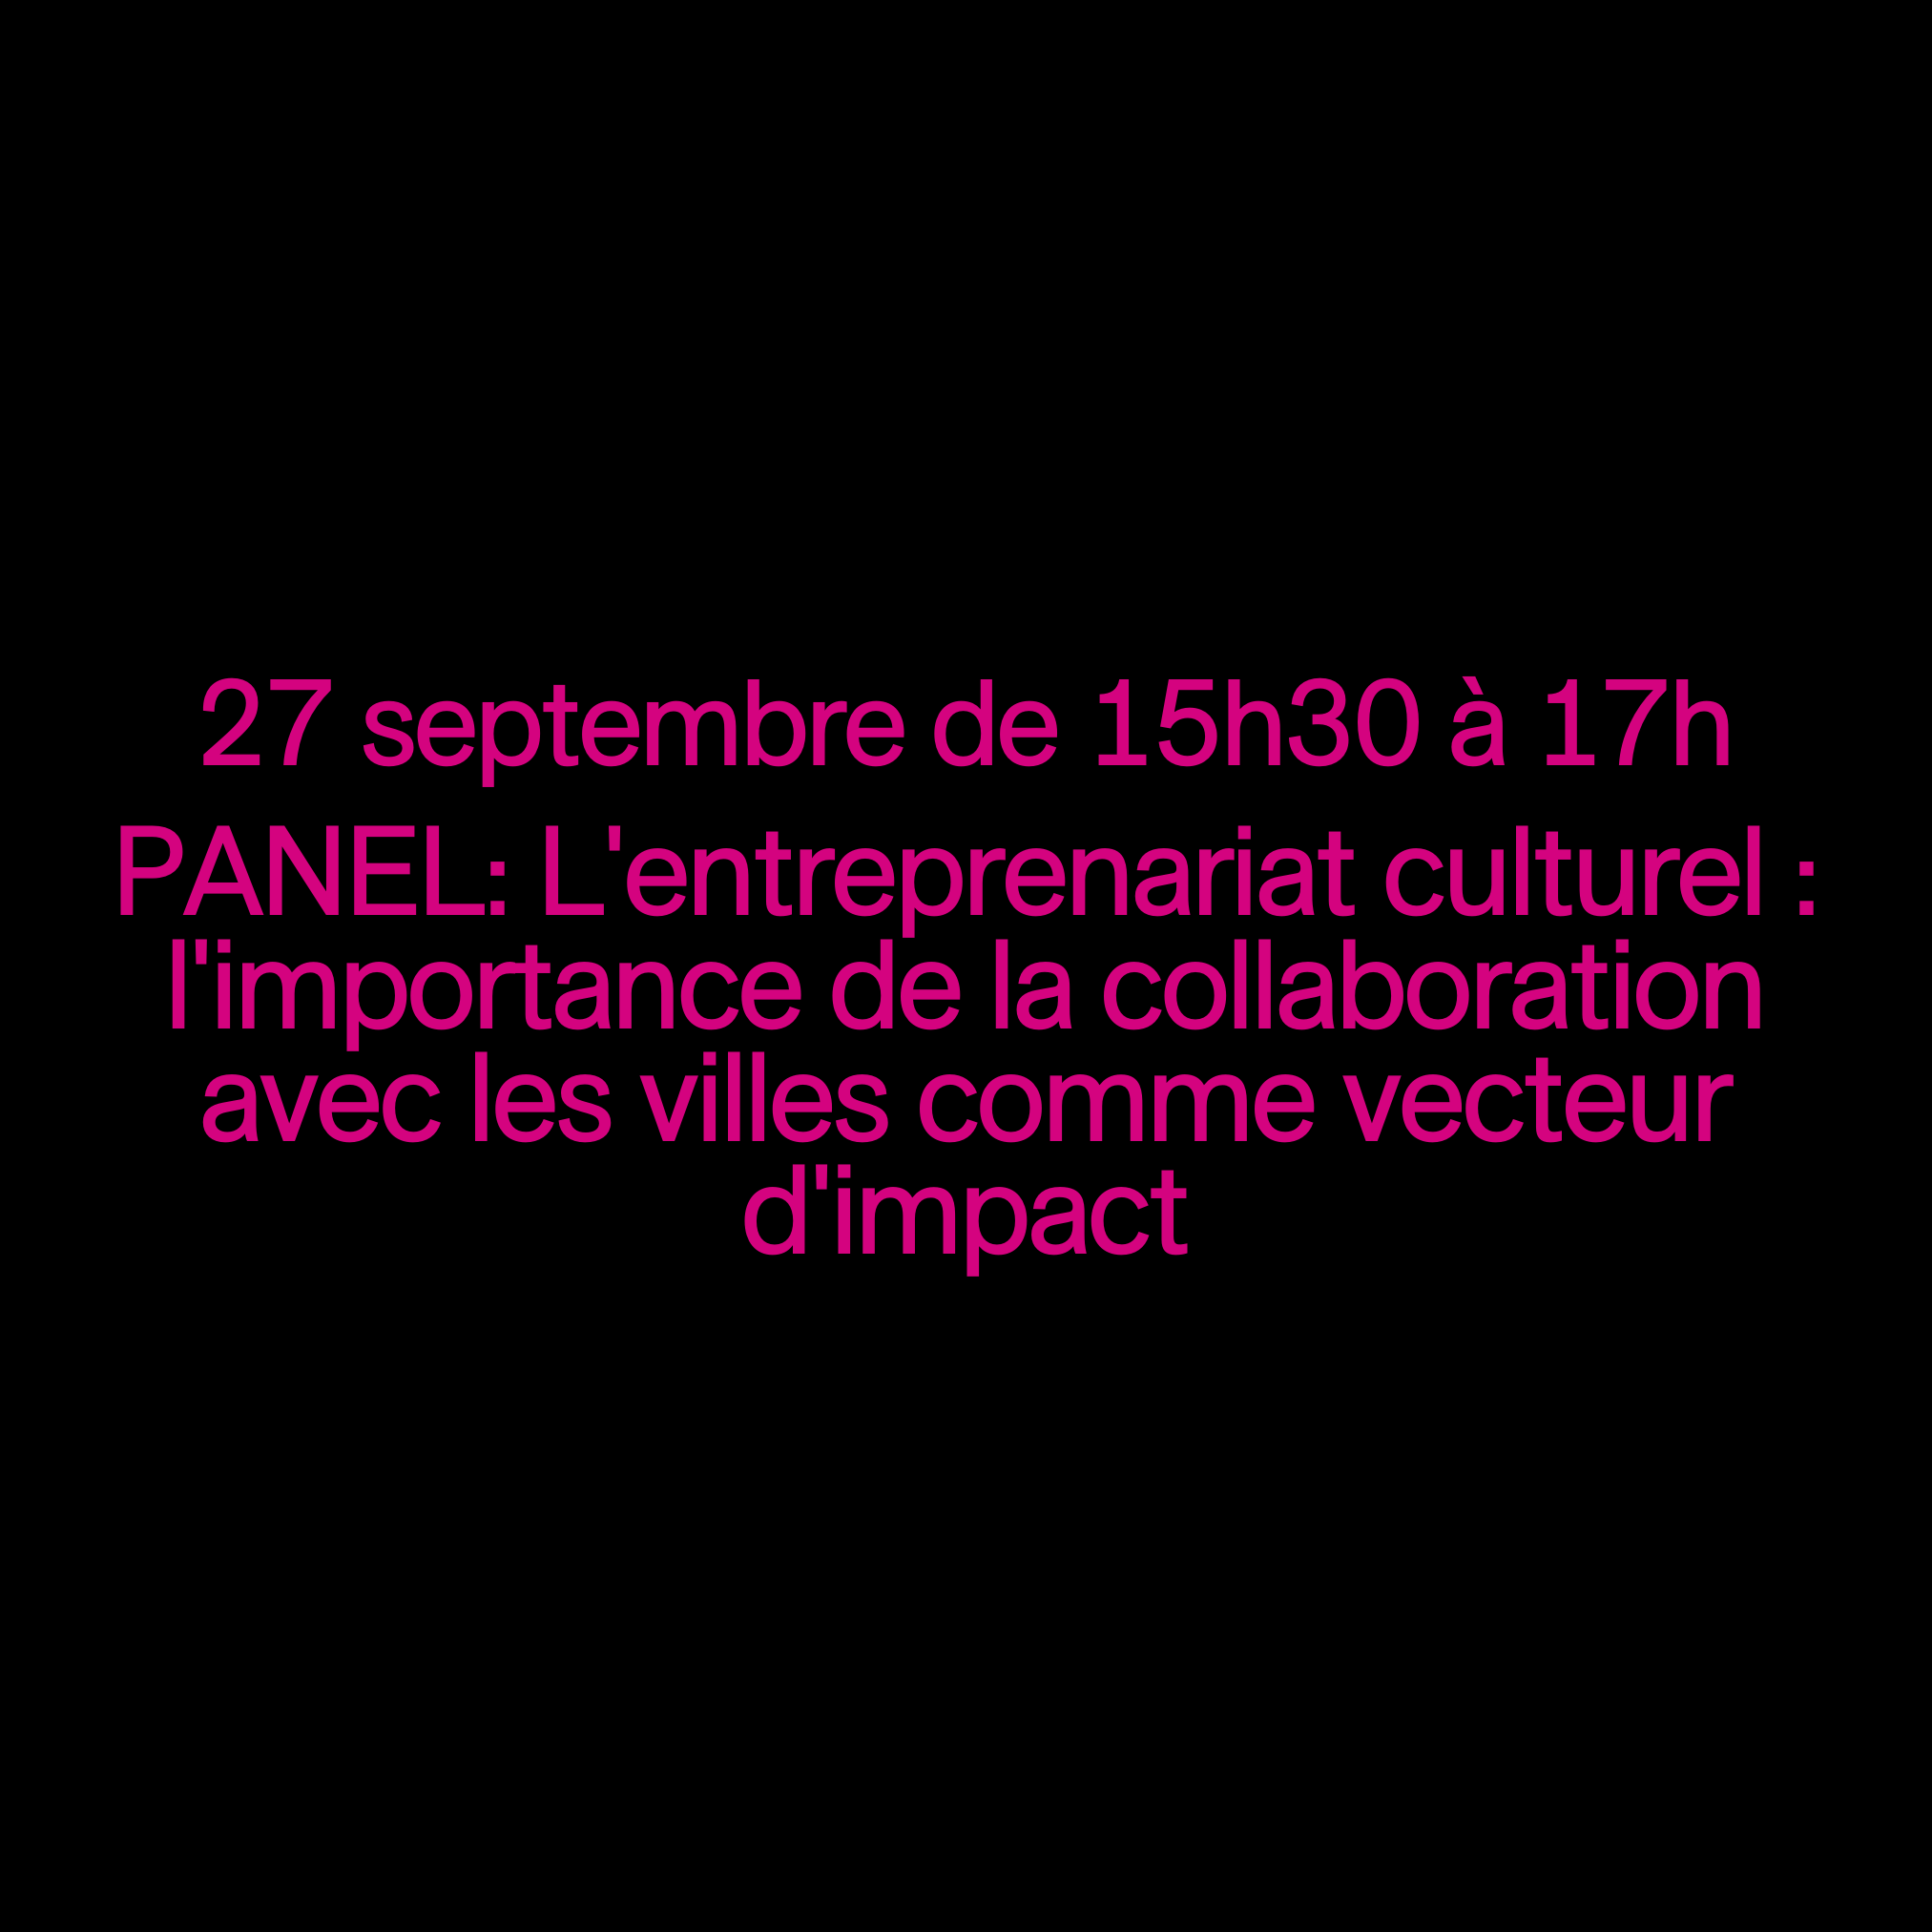 PANEL - Cultural entrepreneurship: the importance of collaboration with cities as a vector of impact